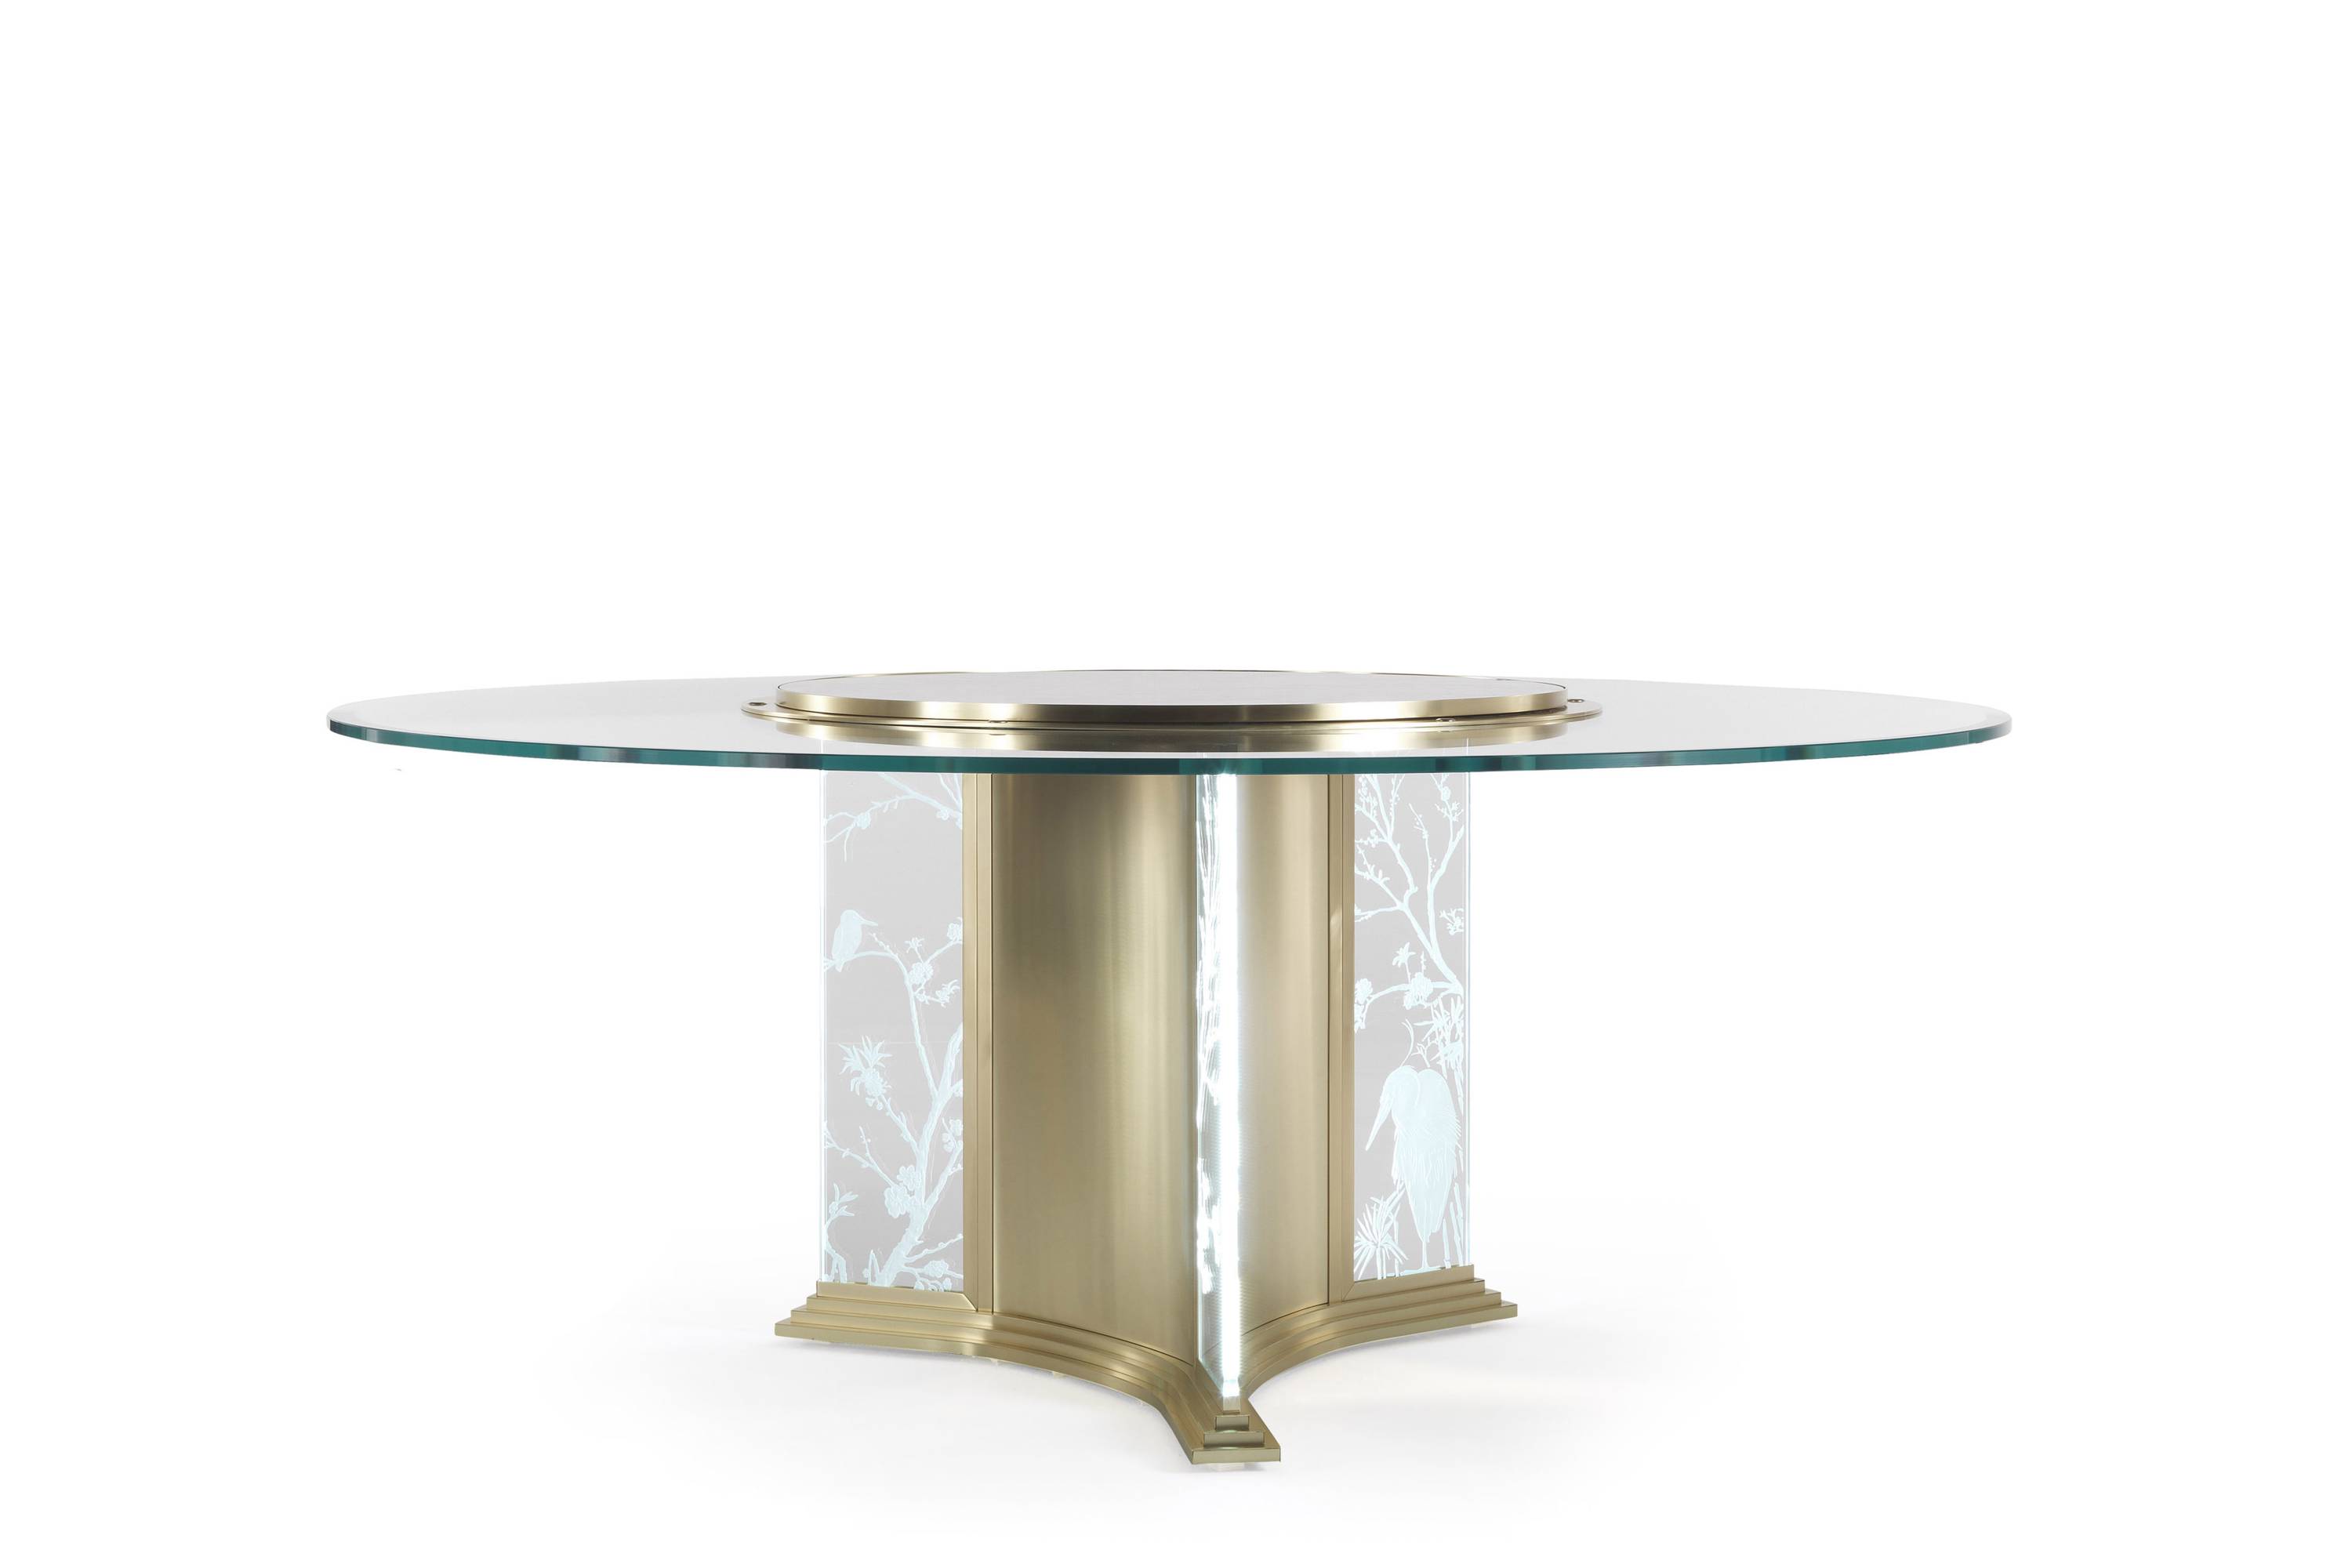 FUJI dining table – Jumbo Collection Italian luxury classic dining tables. tailor-made interior design projects to meet all your furnishing needs